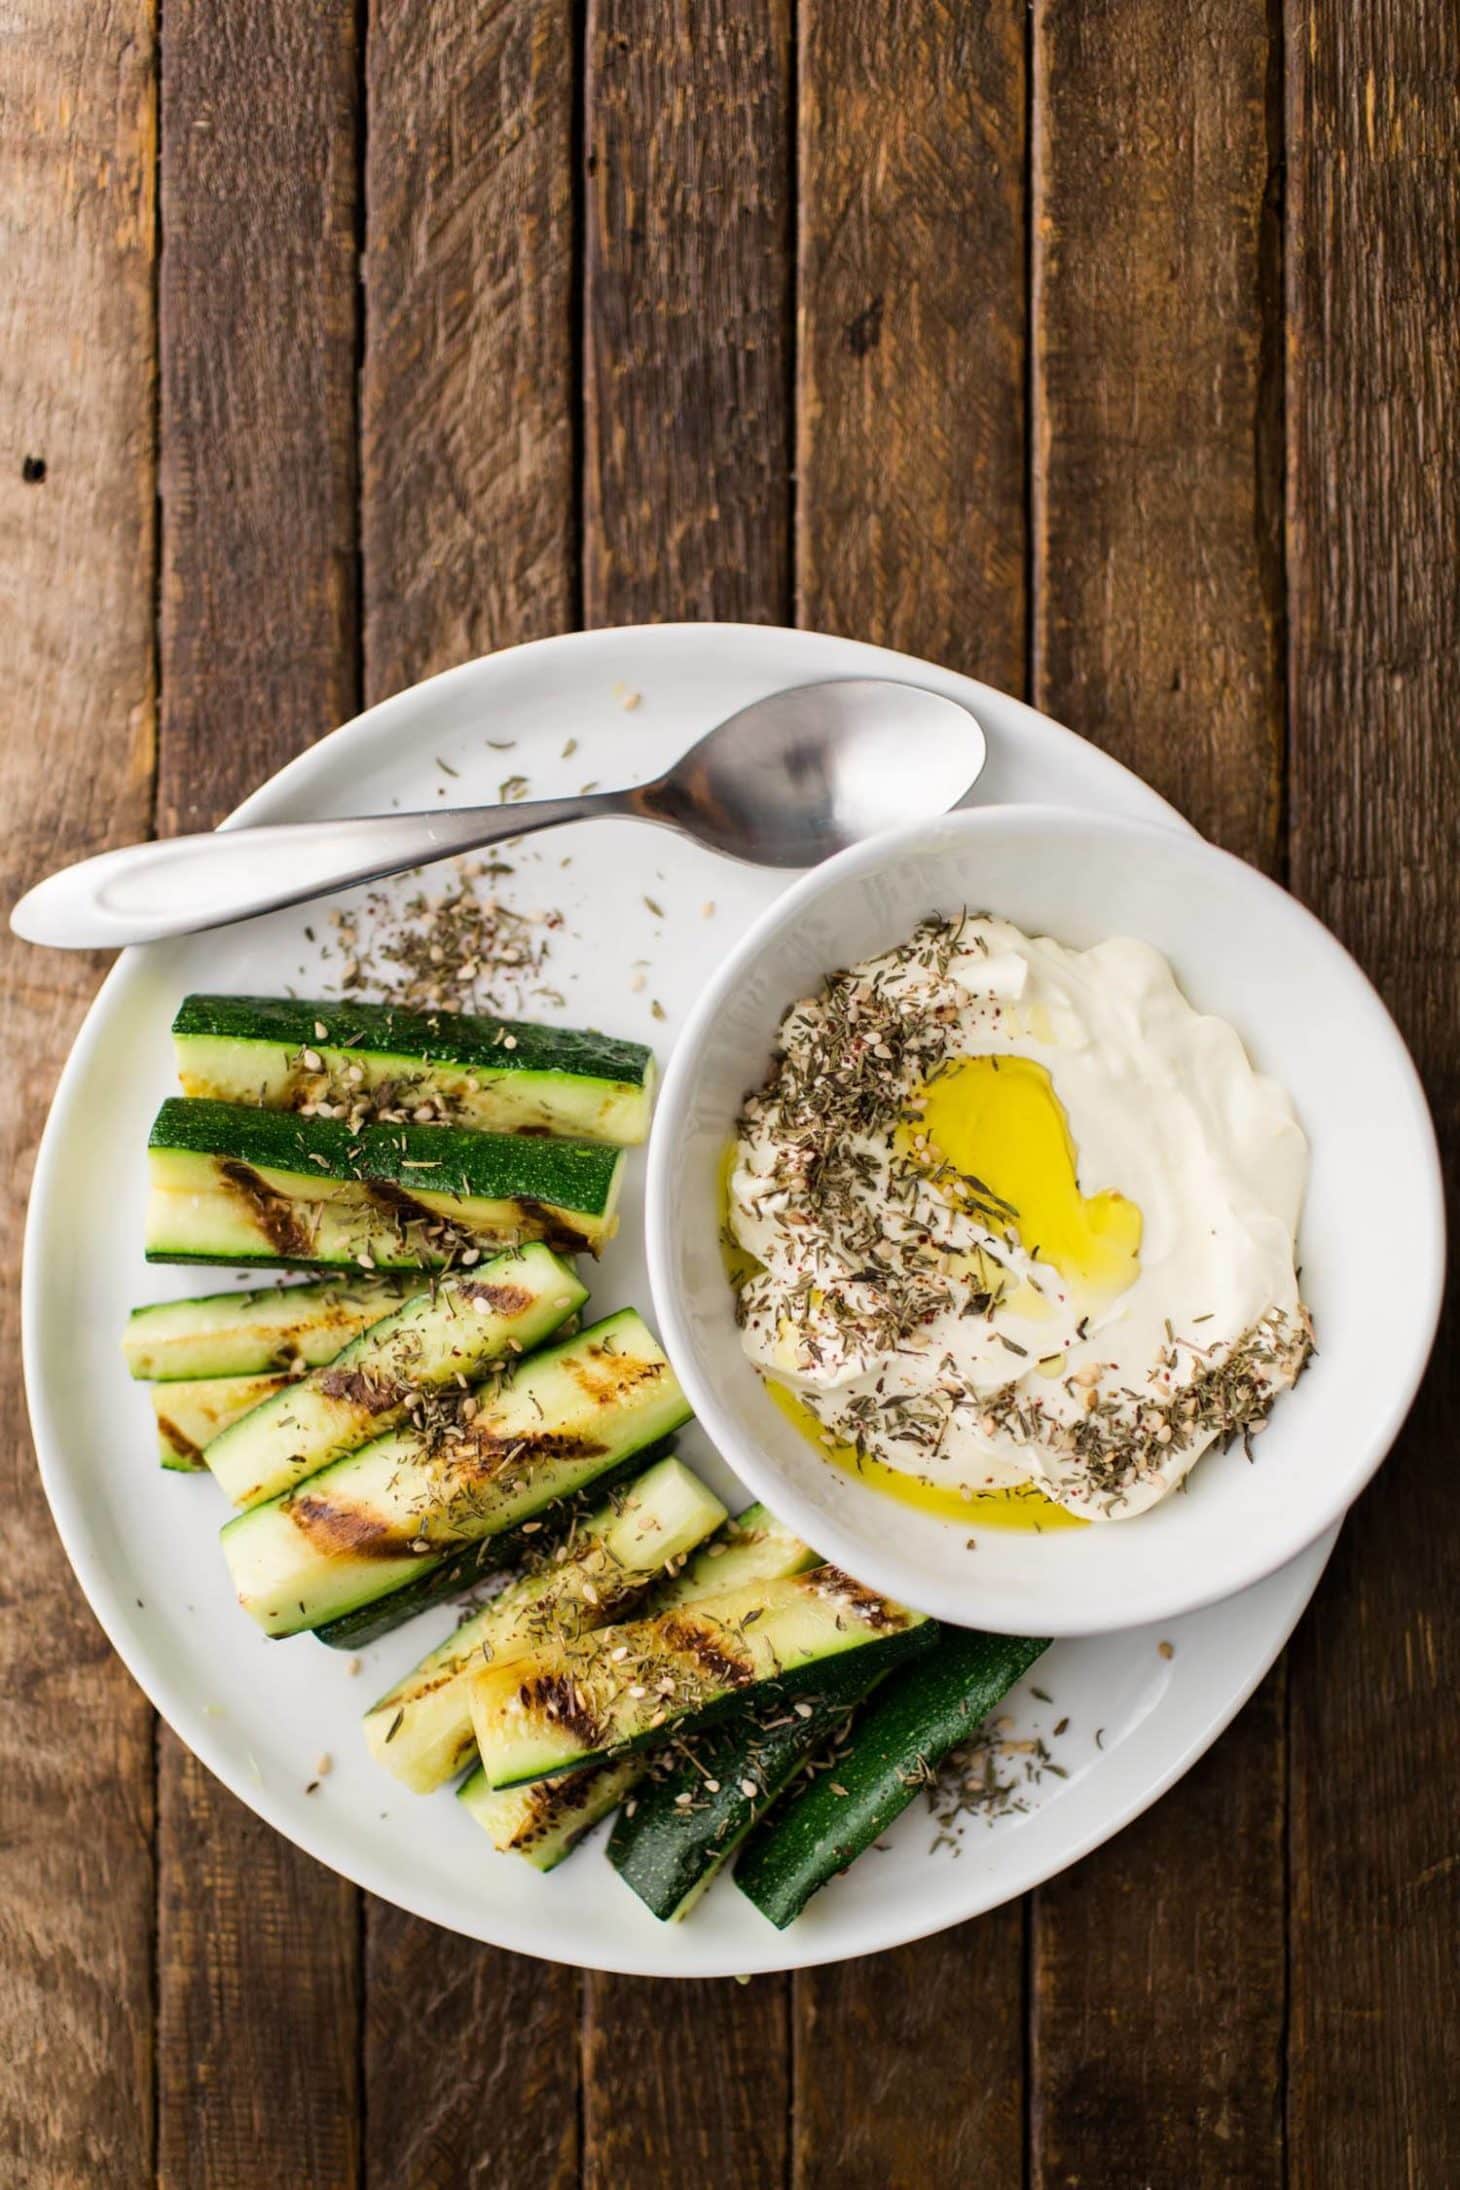 Grilled Zucchini with Lemon Labneh and Za'atar